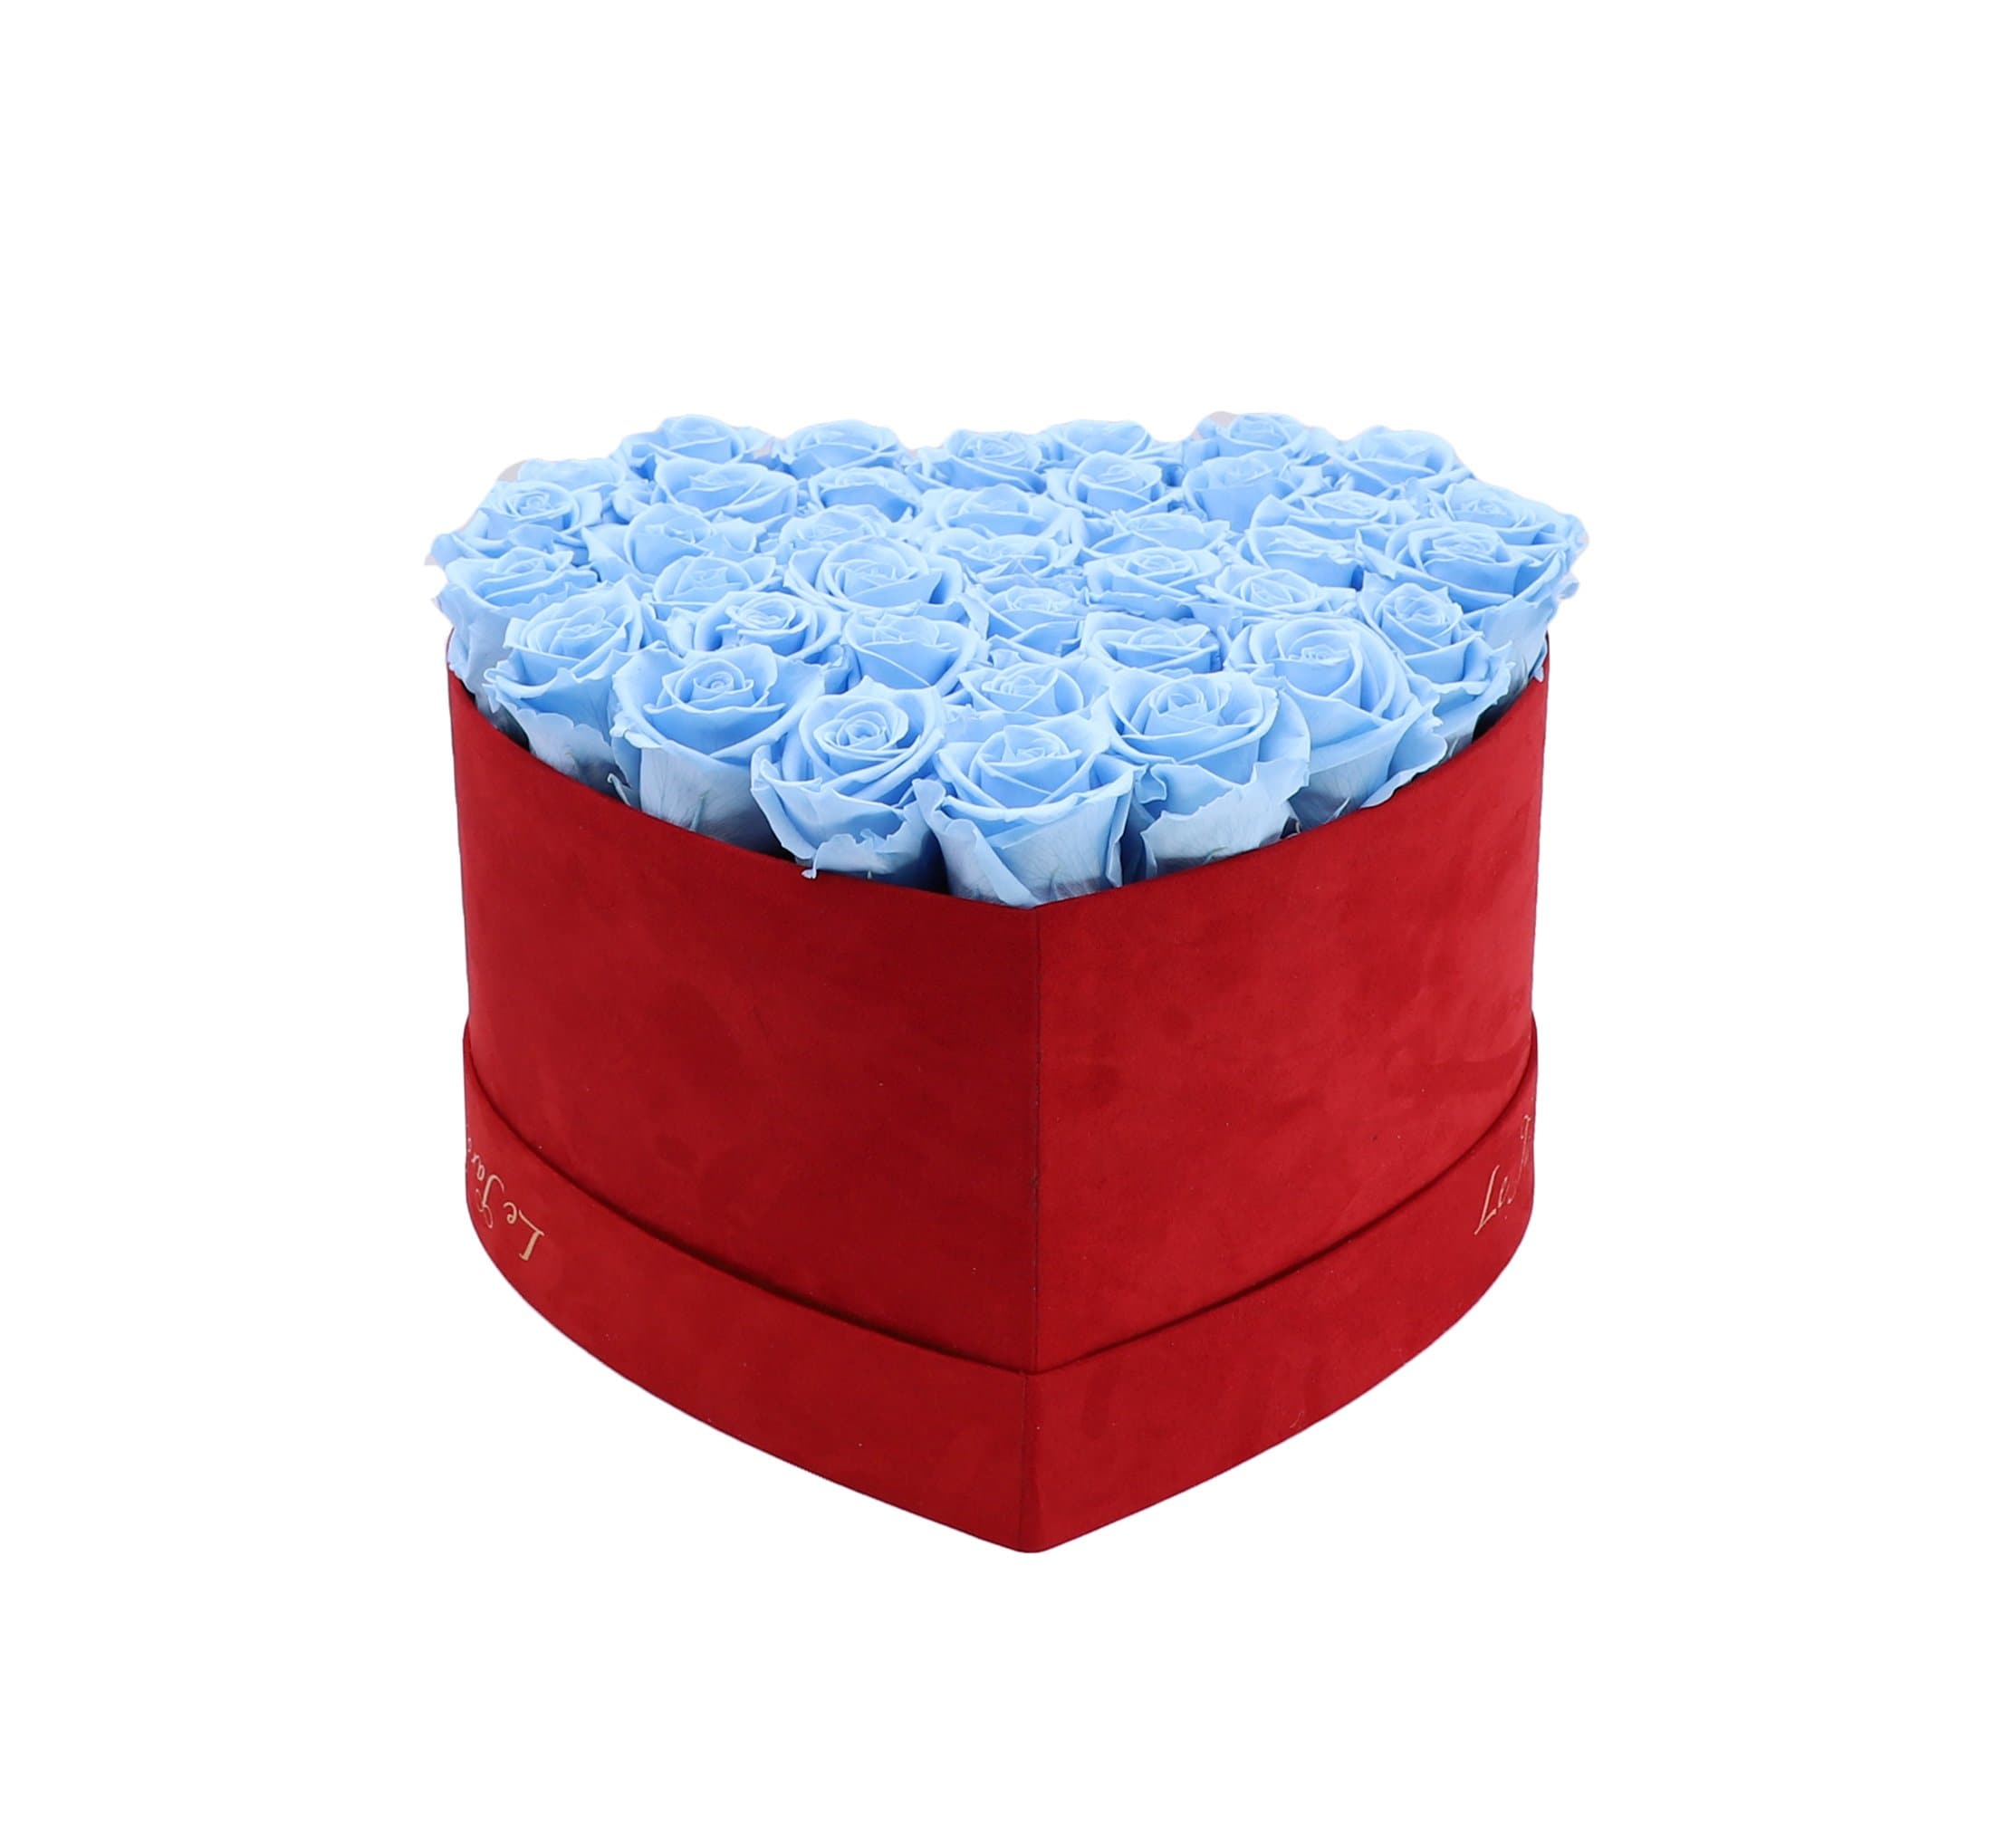 36 Light Blue Preserved Roses in A Heart Shaped Box- Small Heart Luxury Red Suede Box